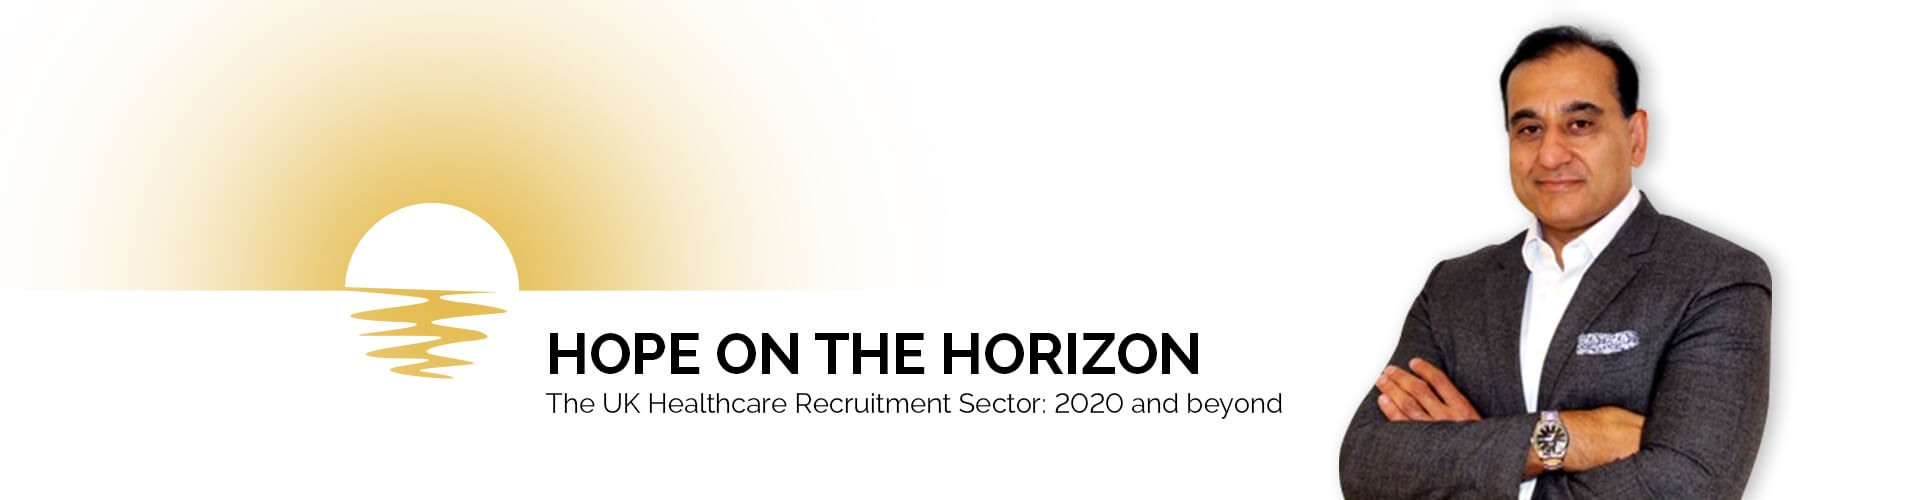 HOPE ON THE HORIZON – The UK Healthcare Recruitment Sector: 2020 and beyond